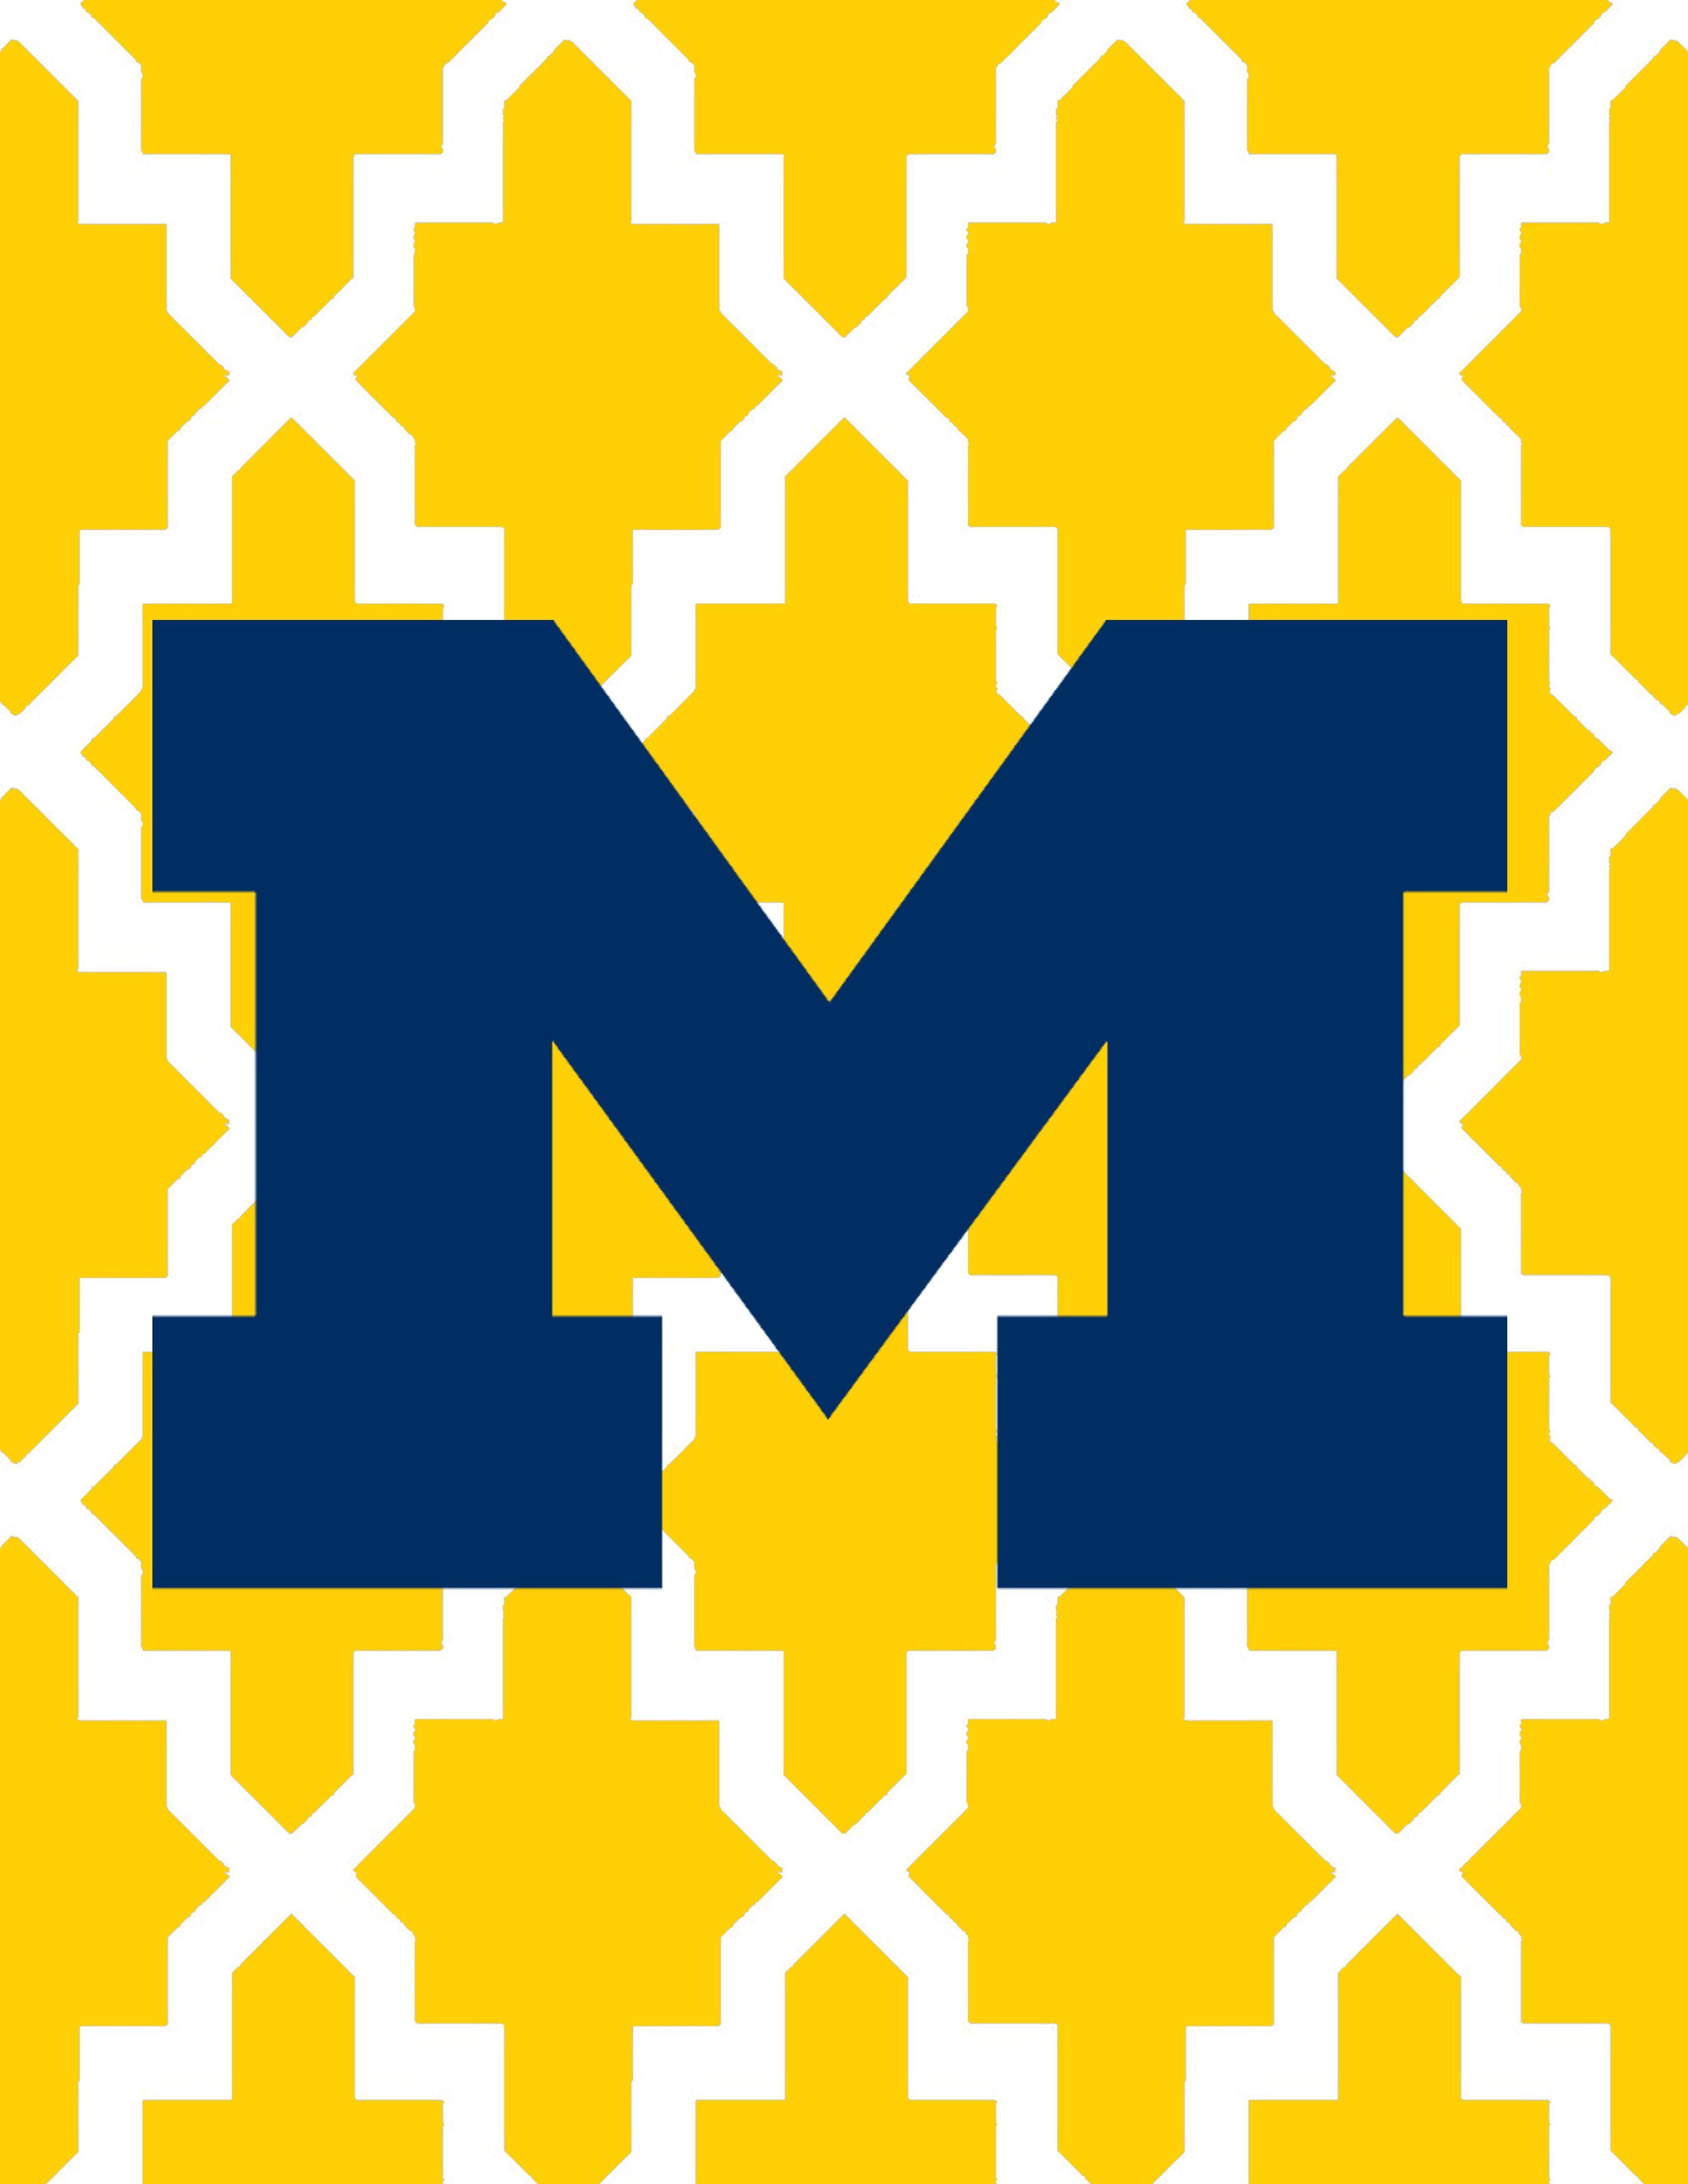 UMich Logo - Download These Exclusive UMich Posters For Your Dorm! | Products I ...